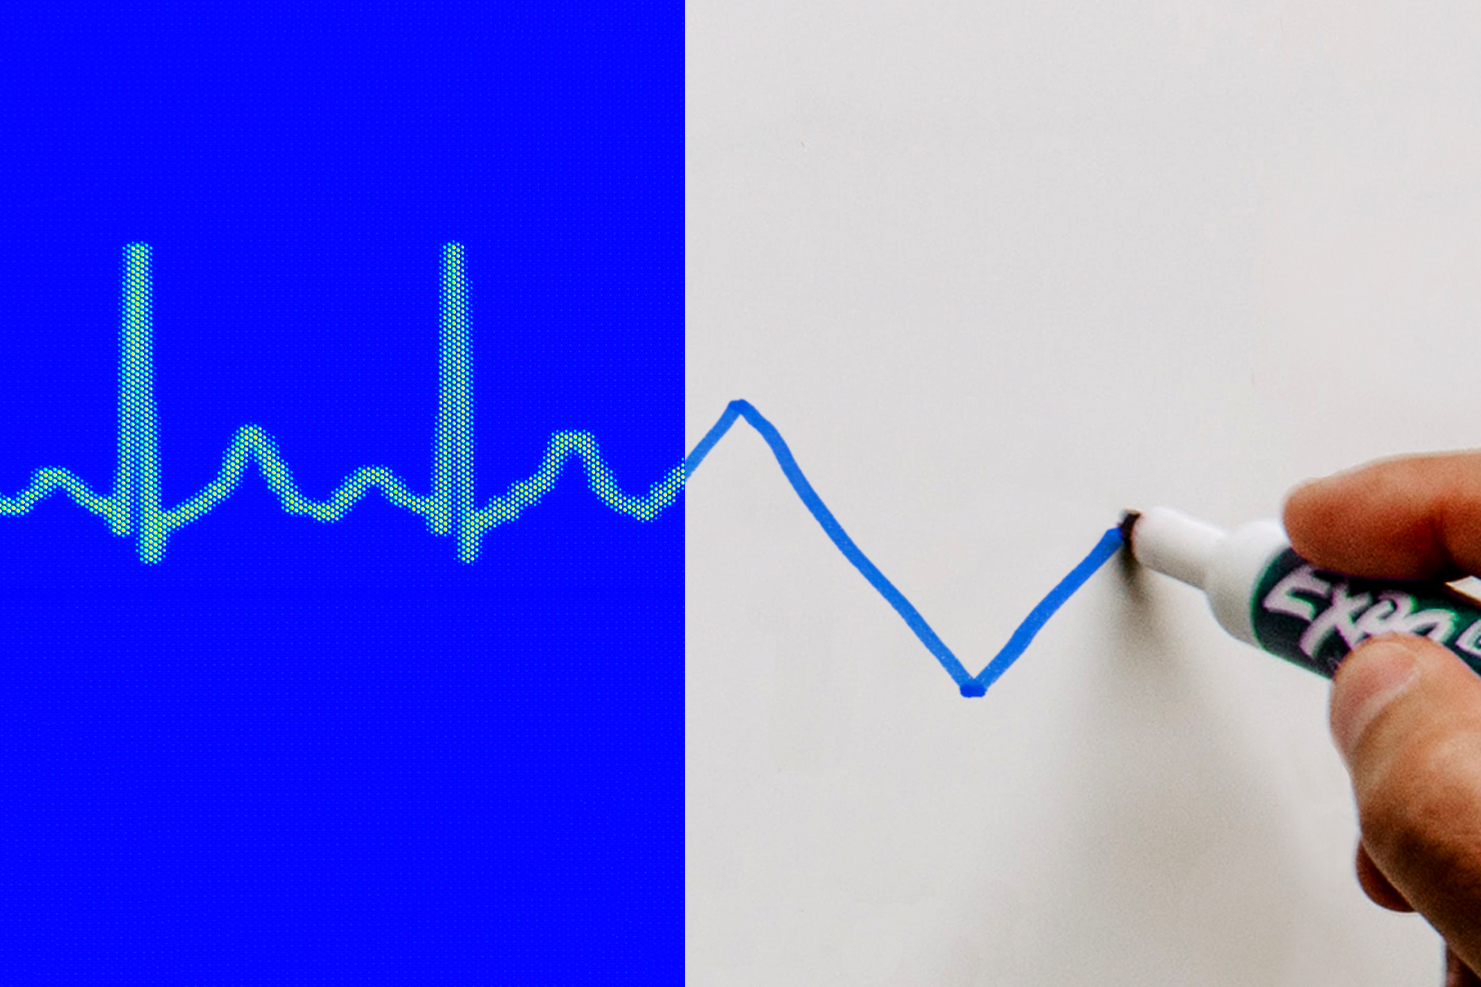 Two part image depicting a heart monitor running into pen writing on a whiteboard.